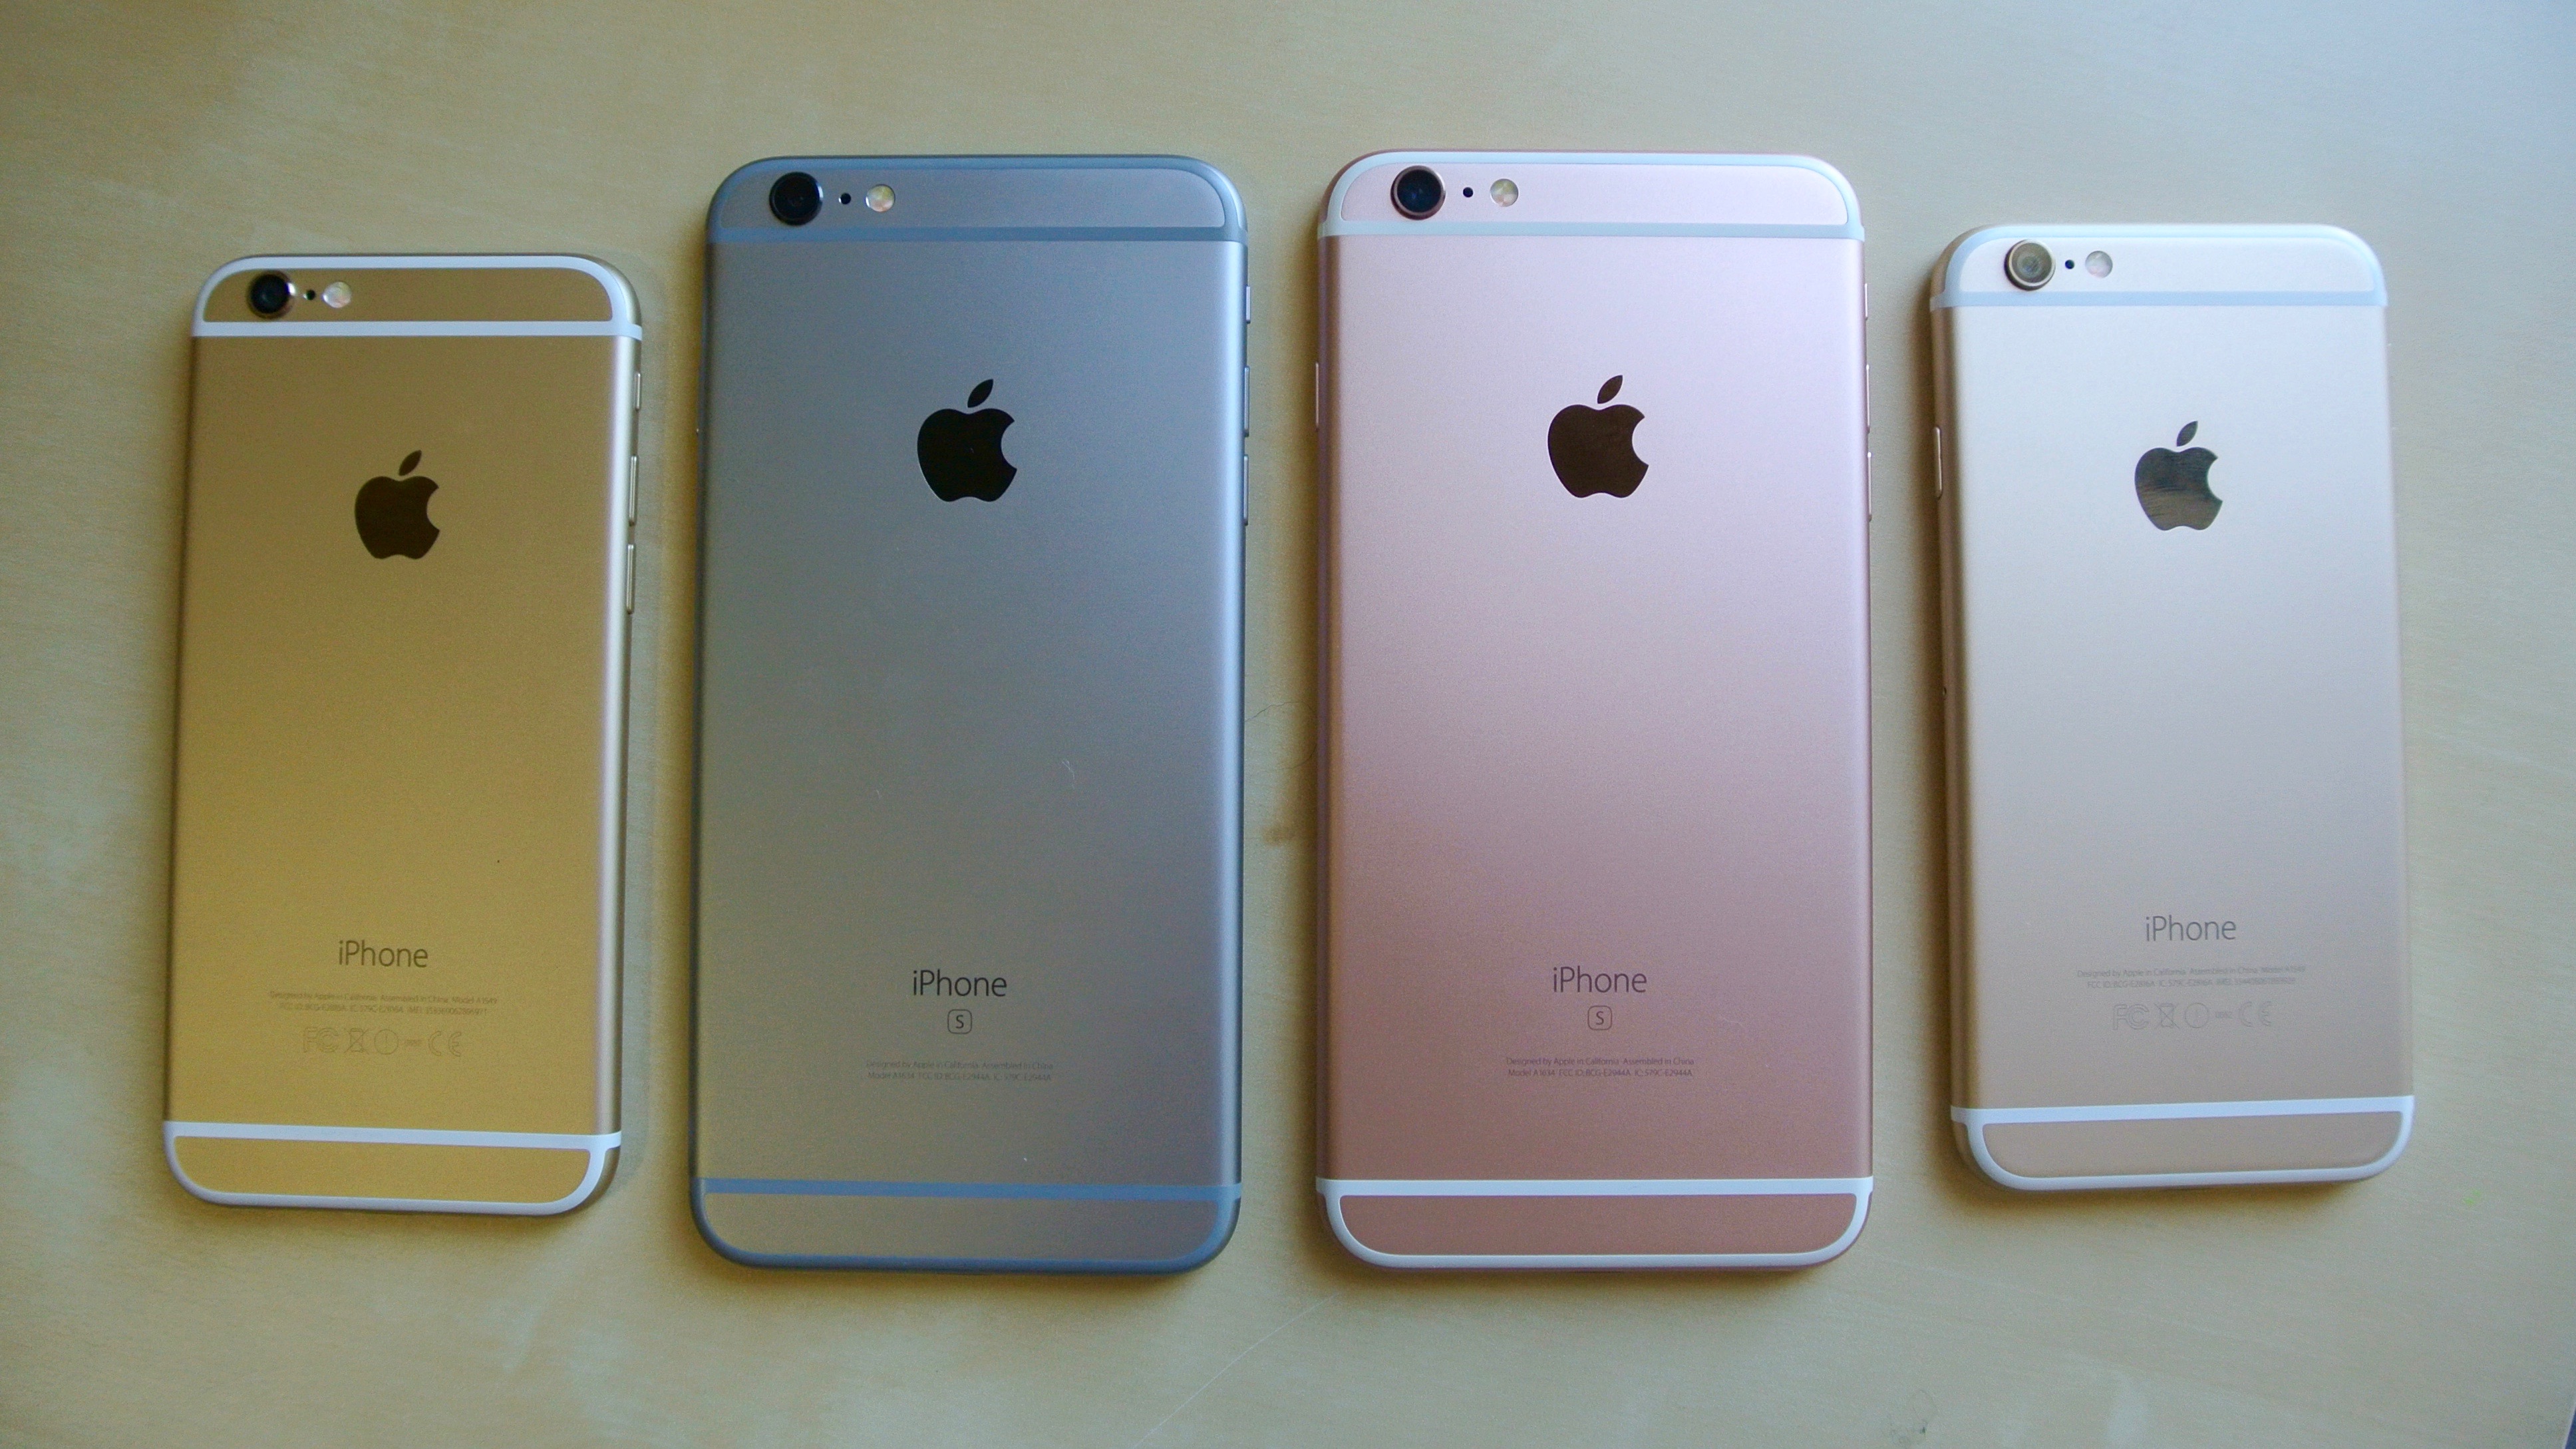 metalen Jongleren Gewoon iPhone 6s Plus: hands-on & first impressions with Space Gray + Rose Gold  [Gallery] - 9to5Mac